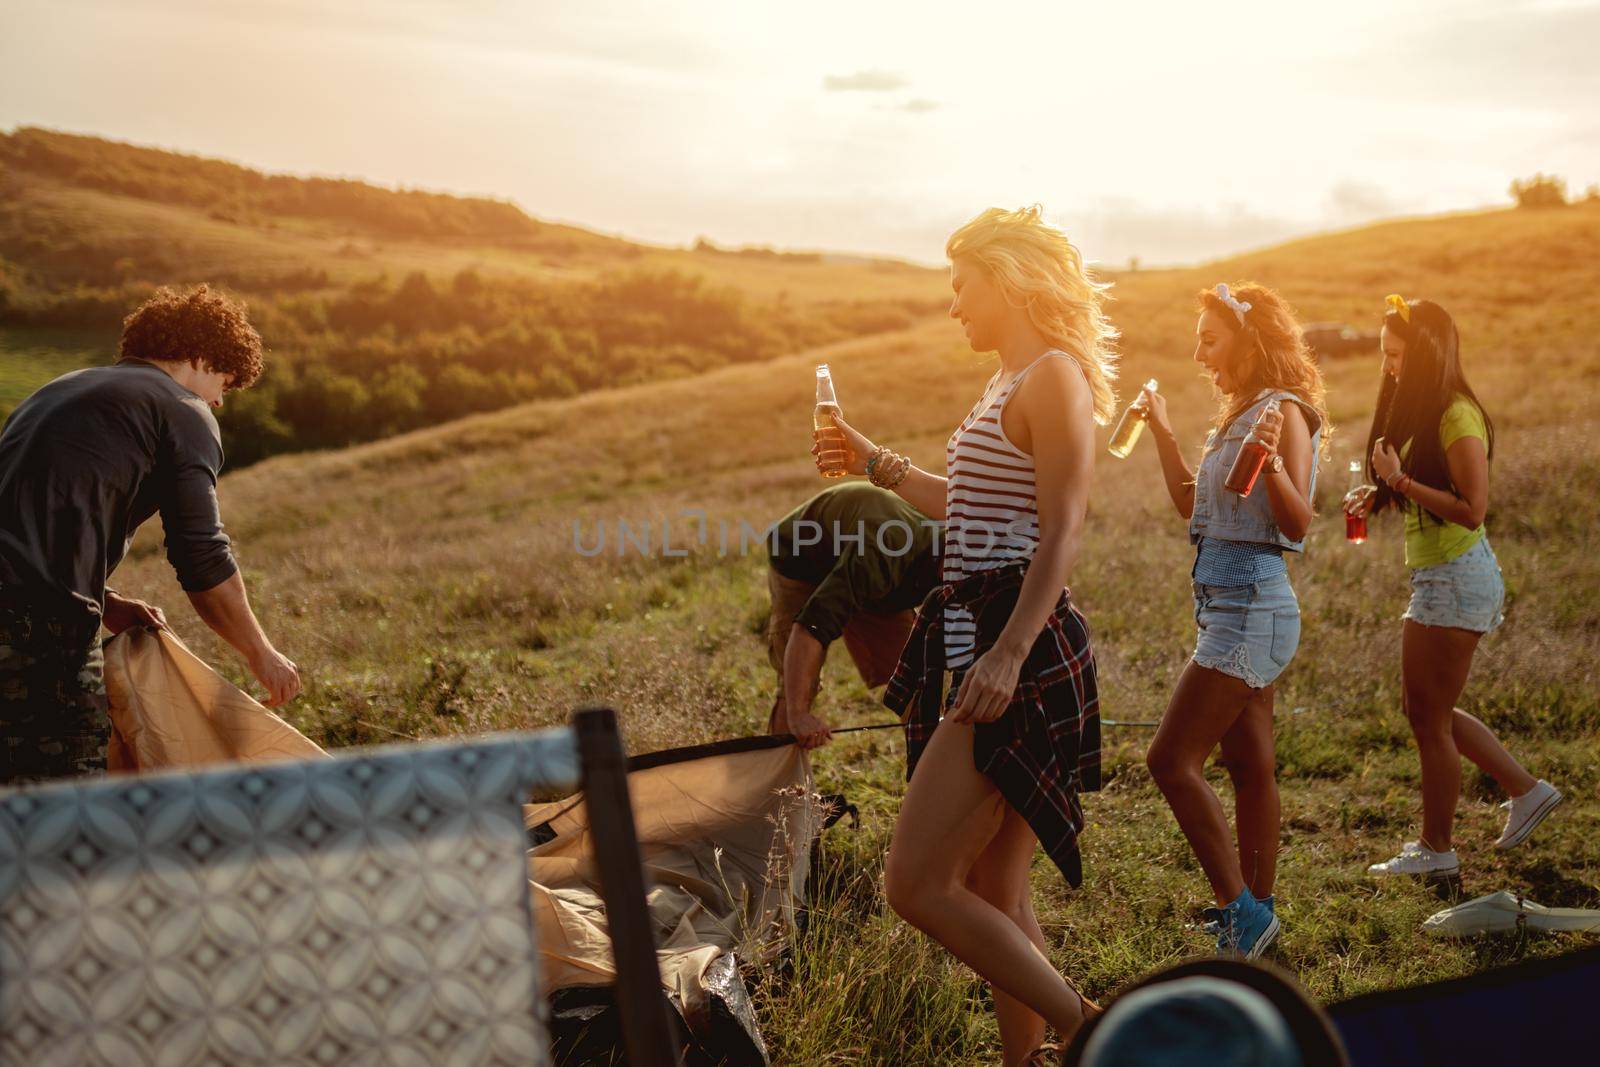 The young happy friends are preparing for camping. They're installing a tent on a suitable place in a meadow and their girlfriends are offering the beer to them.